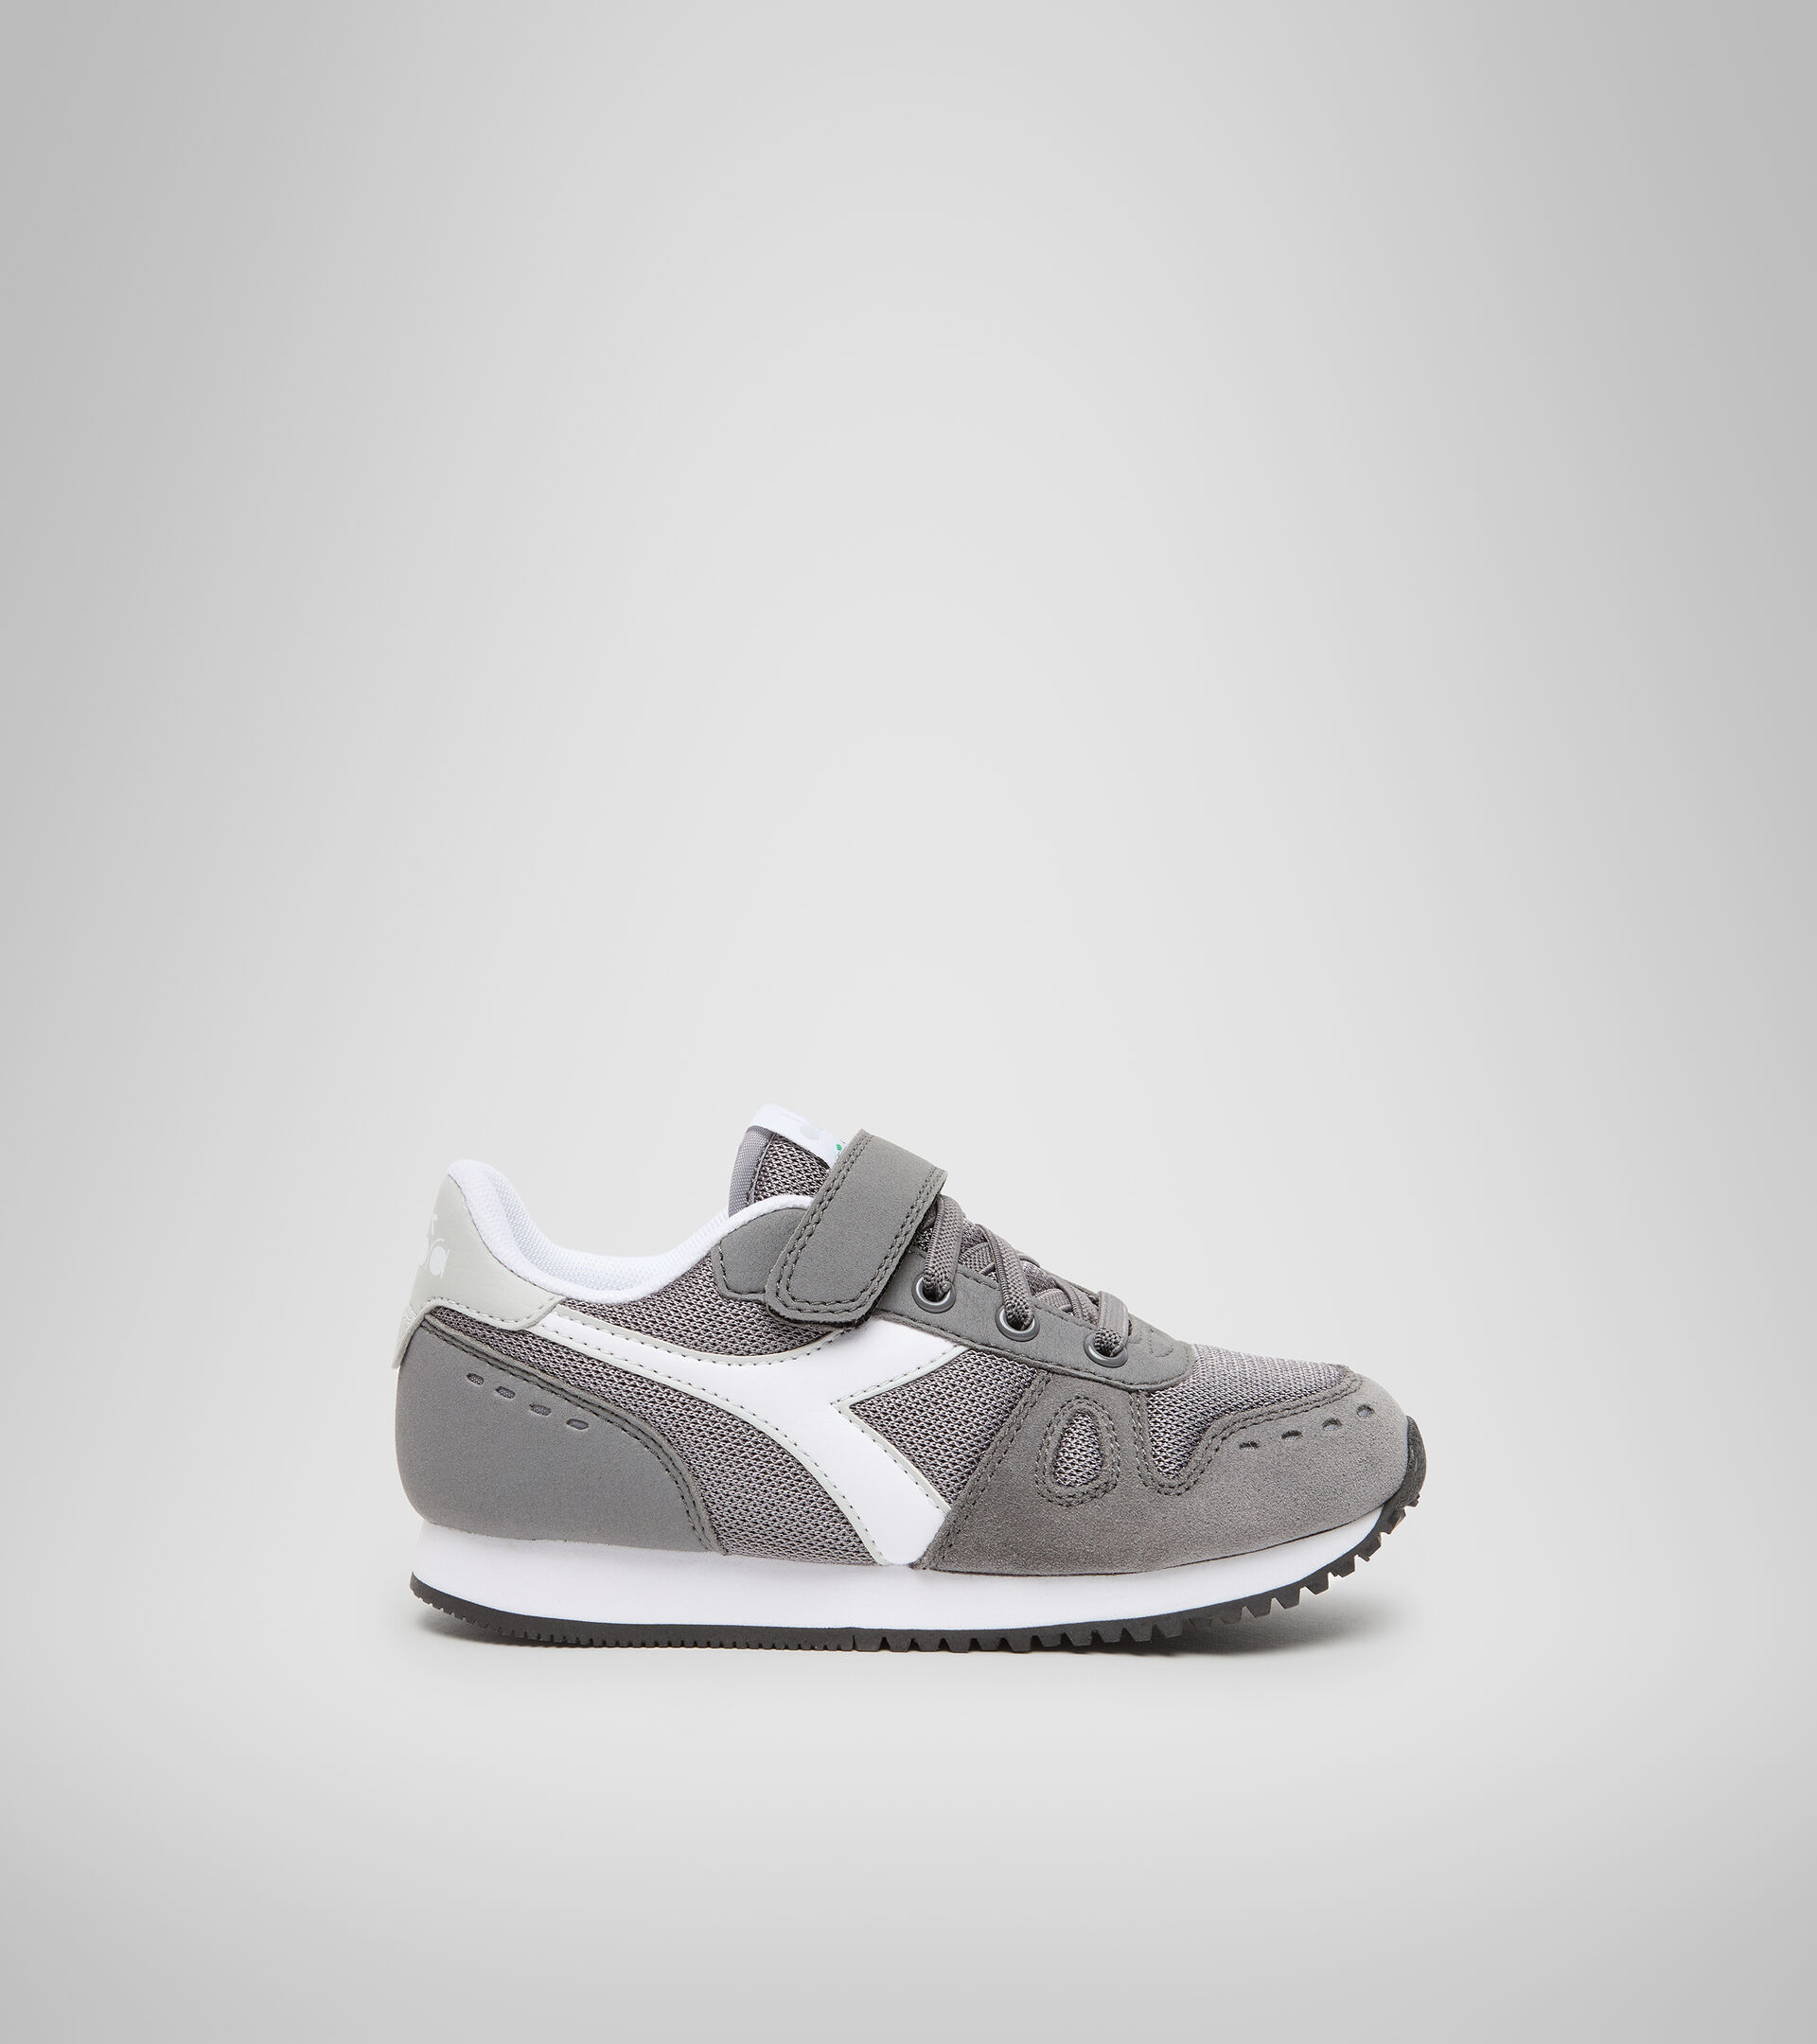 SIMPLE RUN PS Sports shoes - Kids 4-8 years - Diadora Online Store